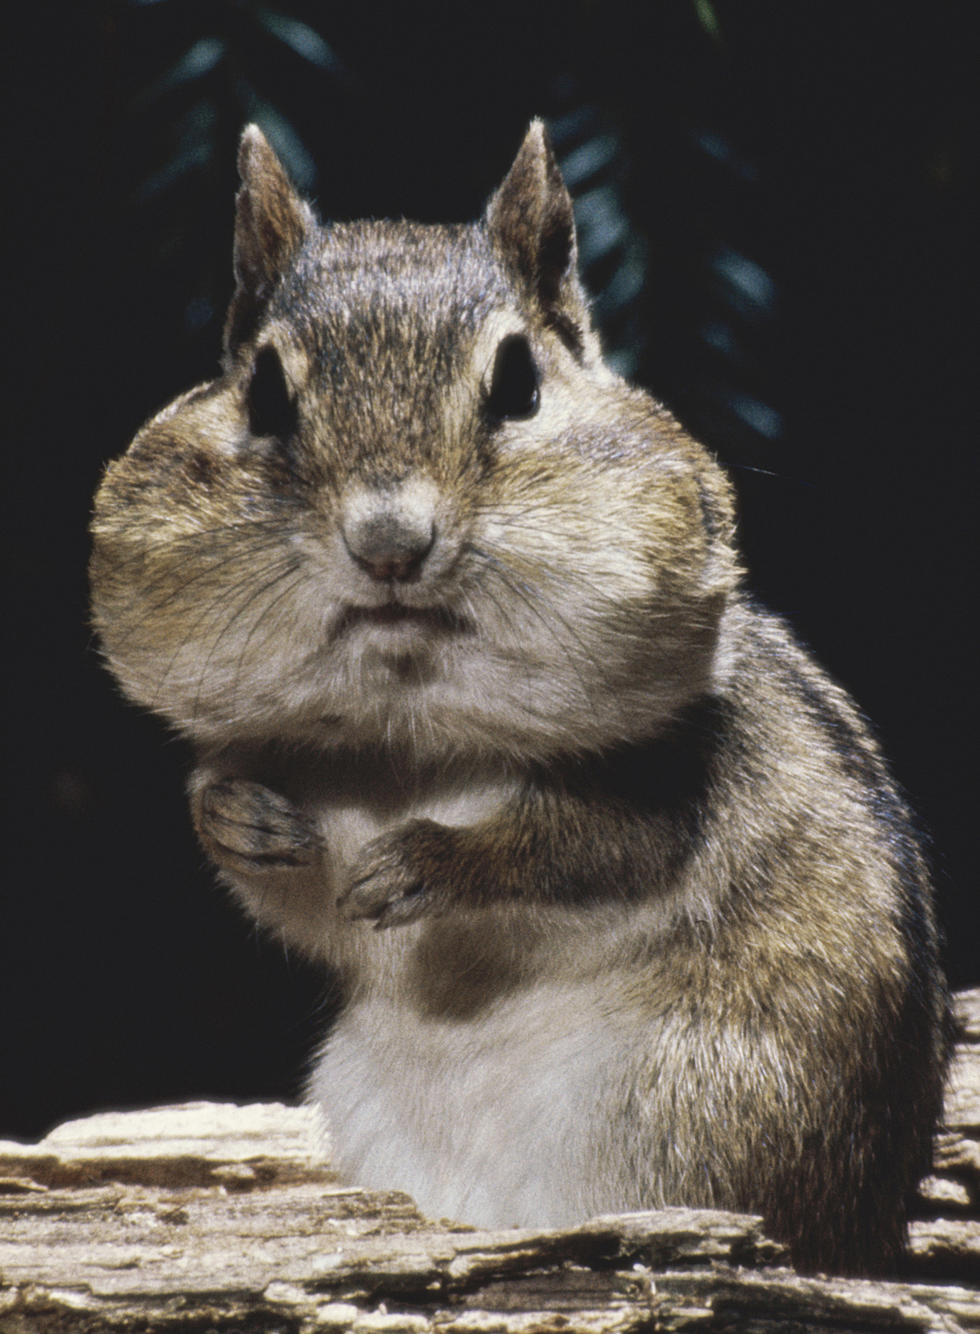 HEY NH!  What’s Up With All The Chipmunks This Year?